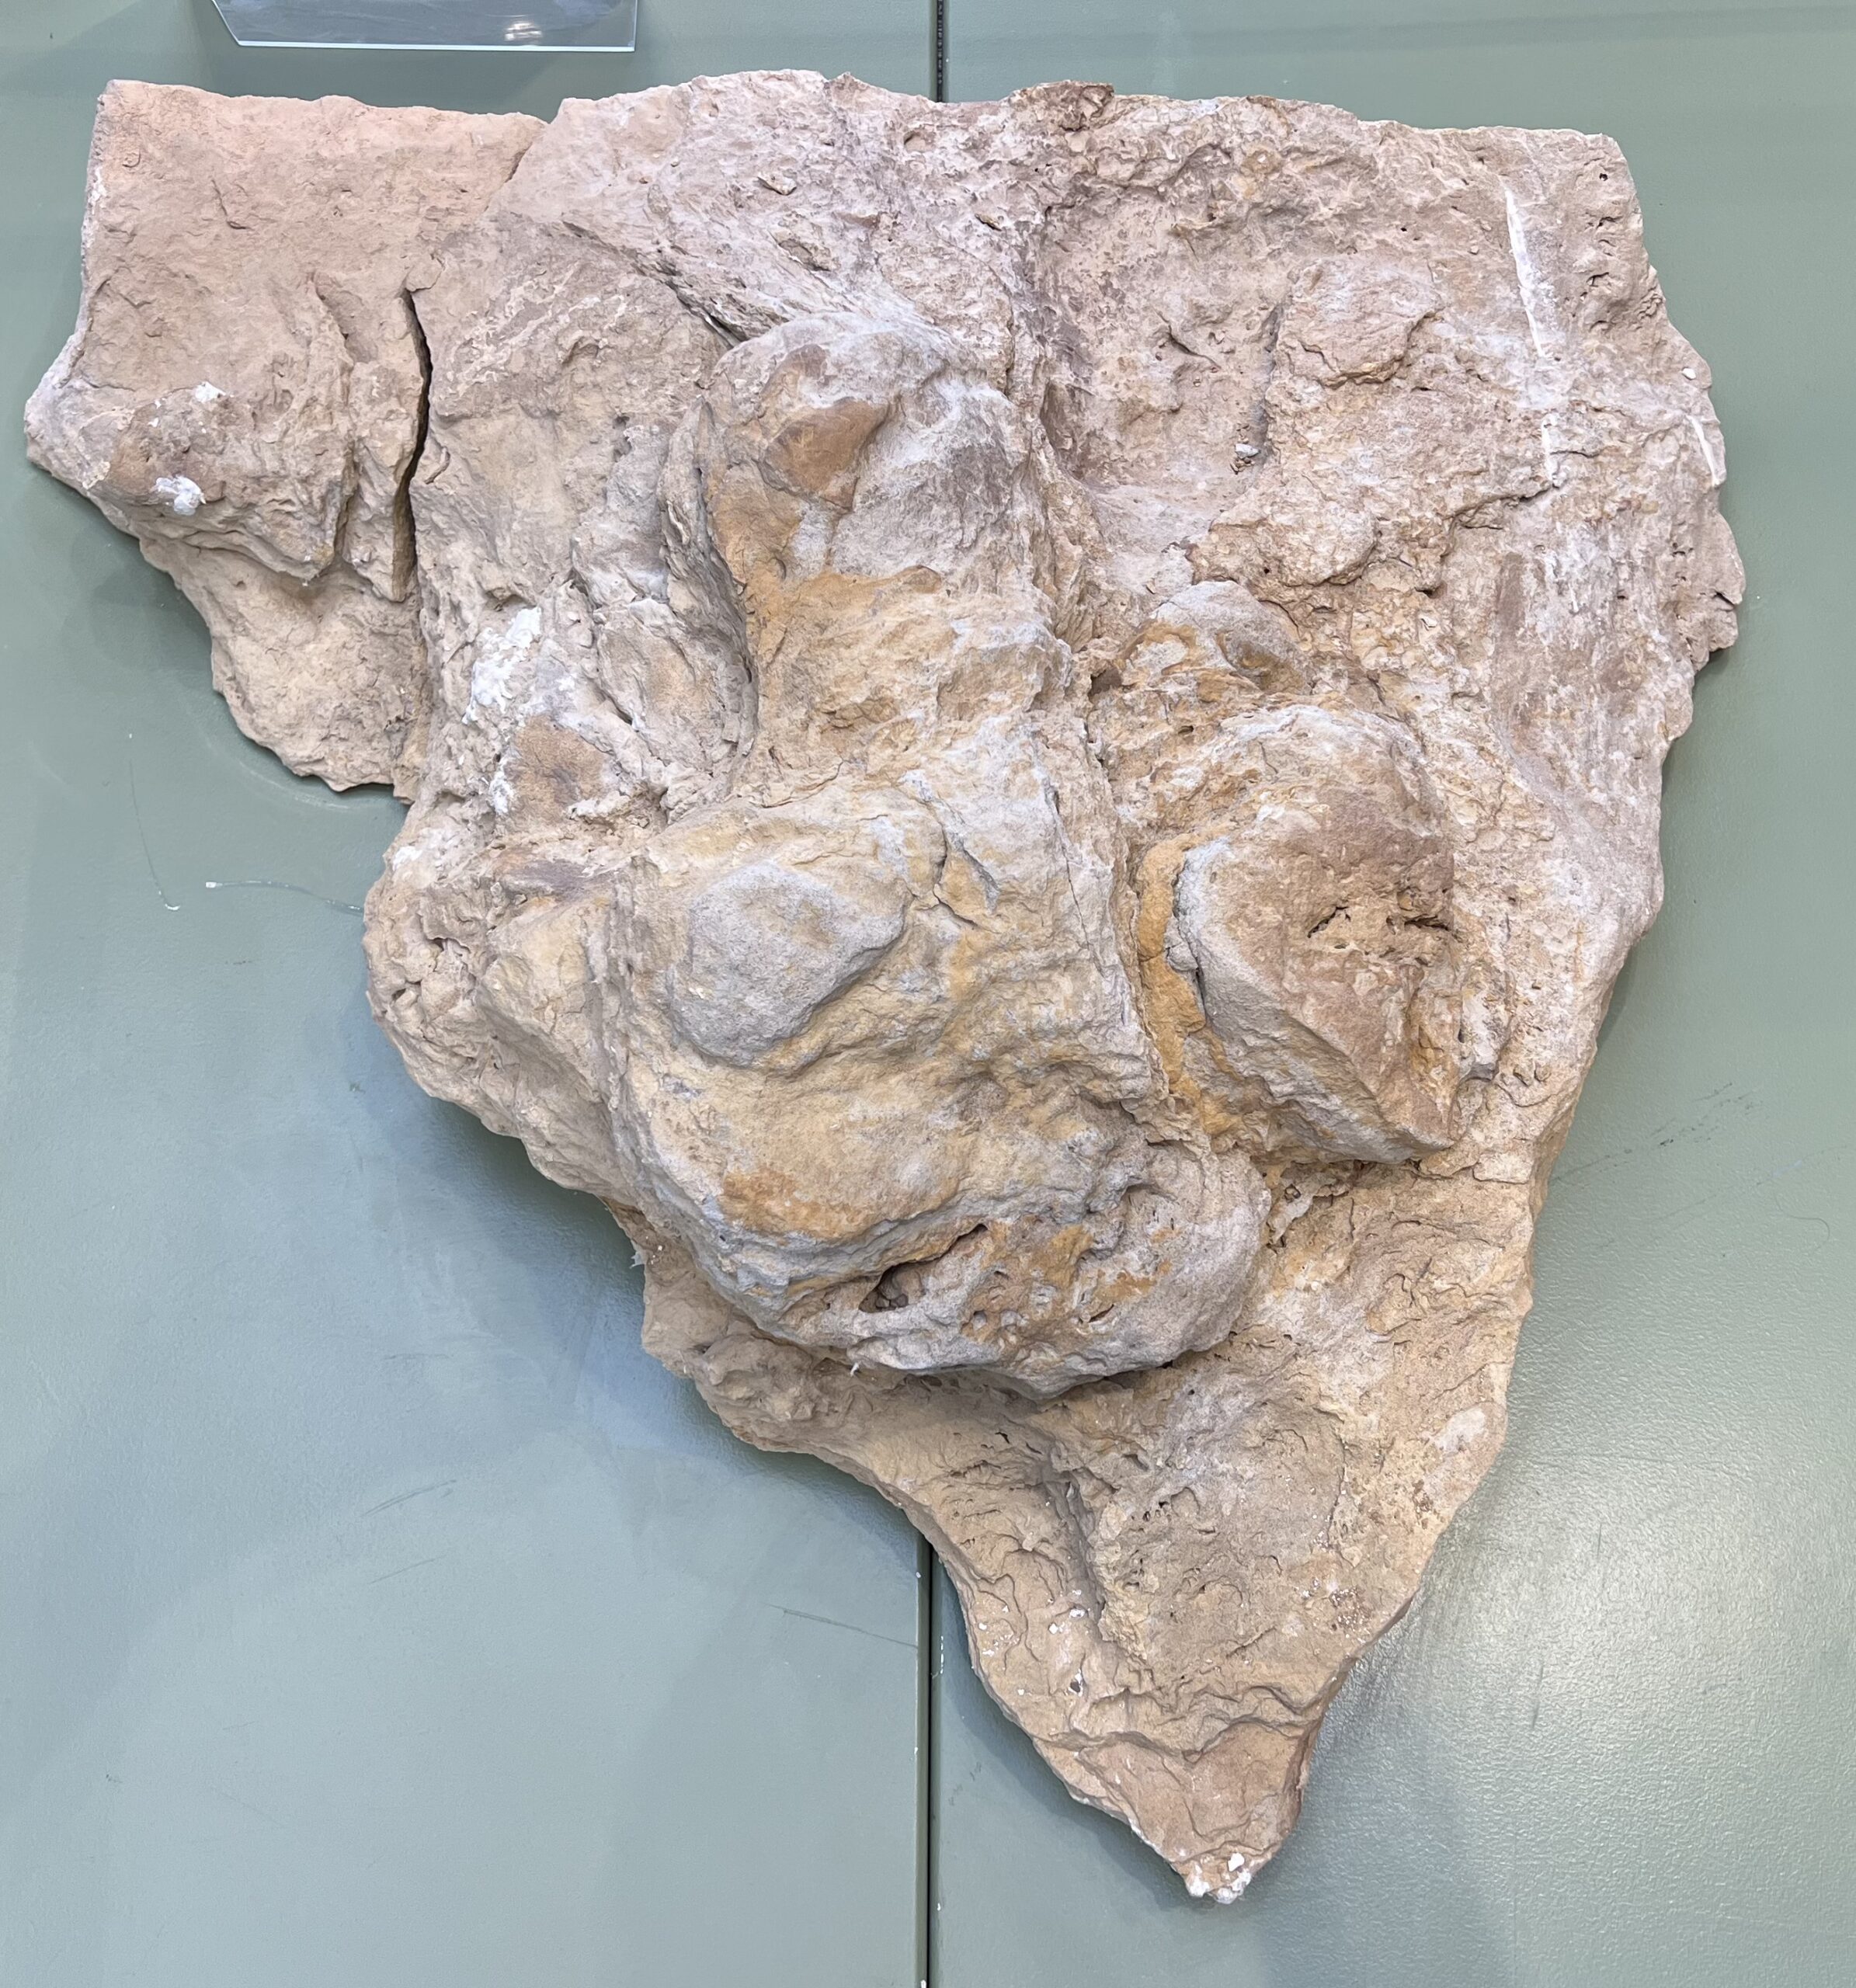 Photo of a ceratopsian footprint cast in stone on display at the Golden History Museum